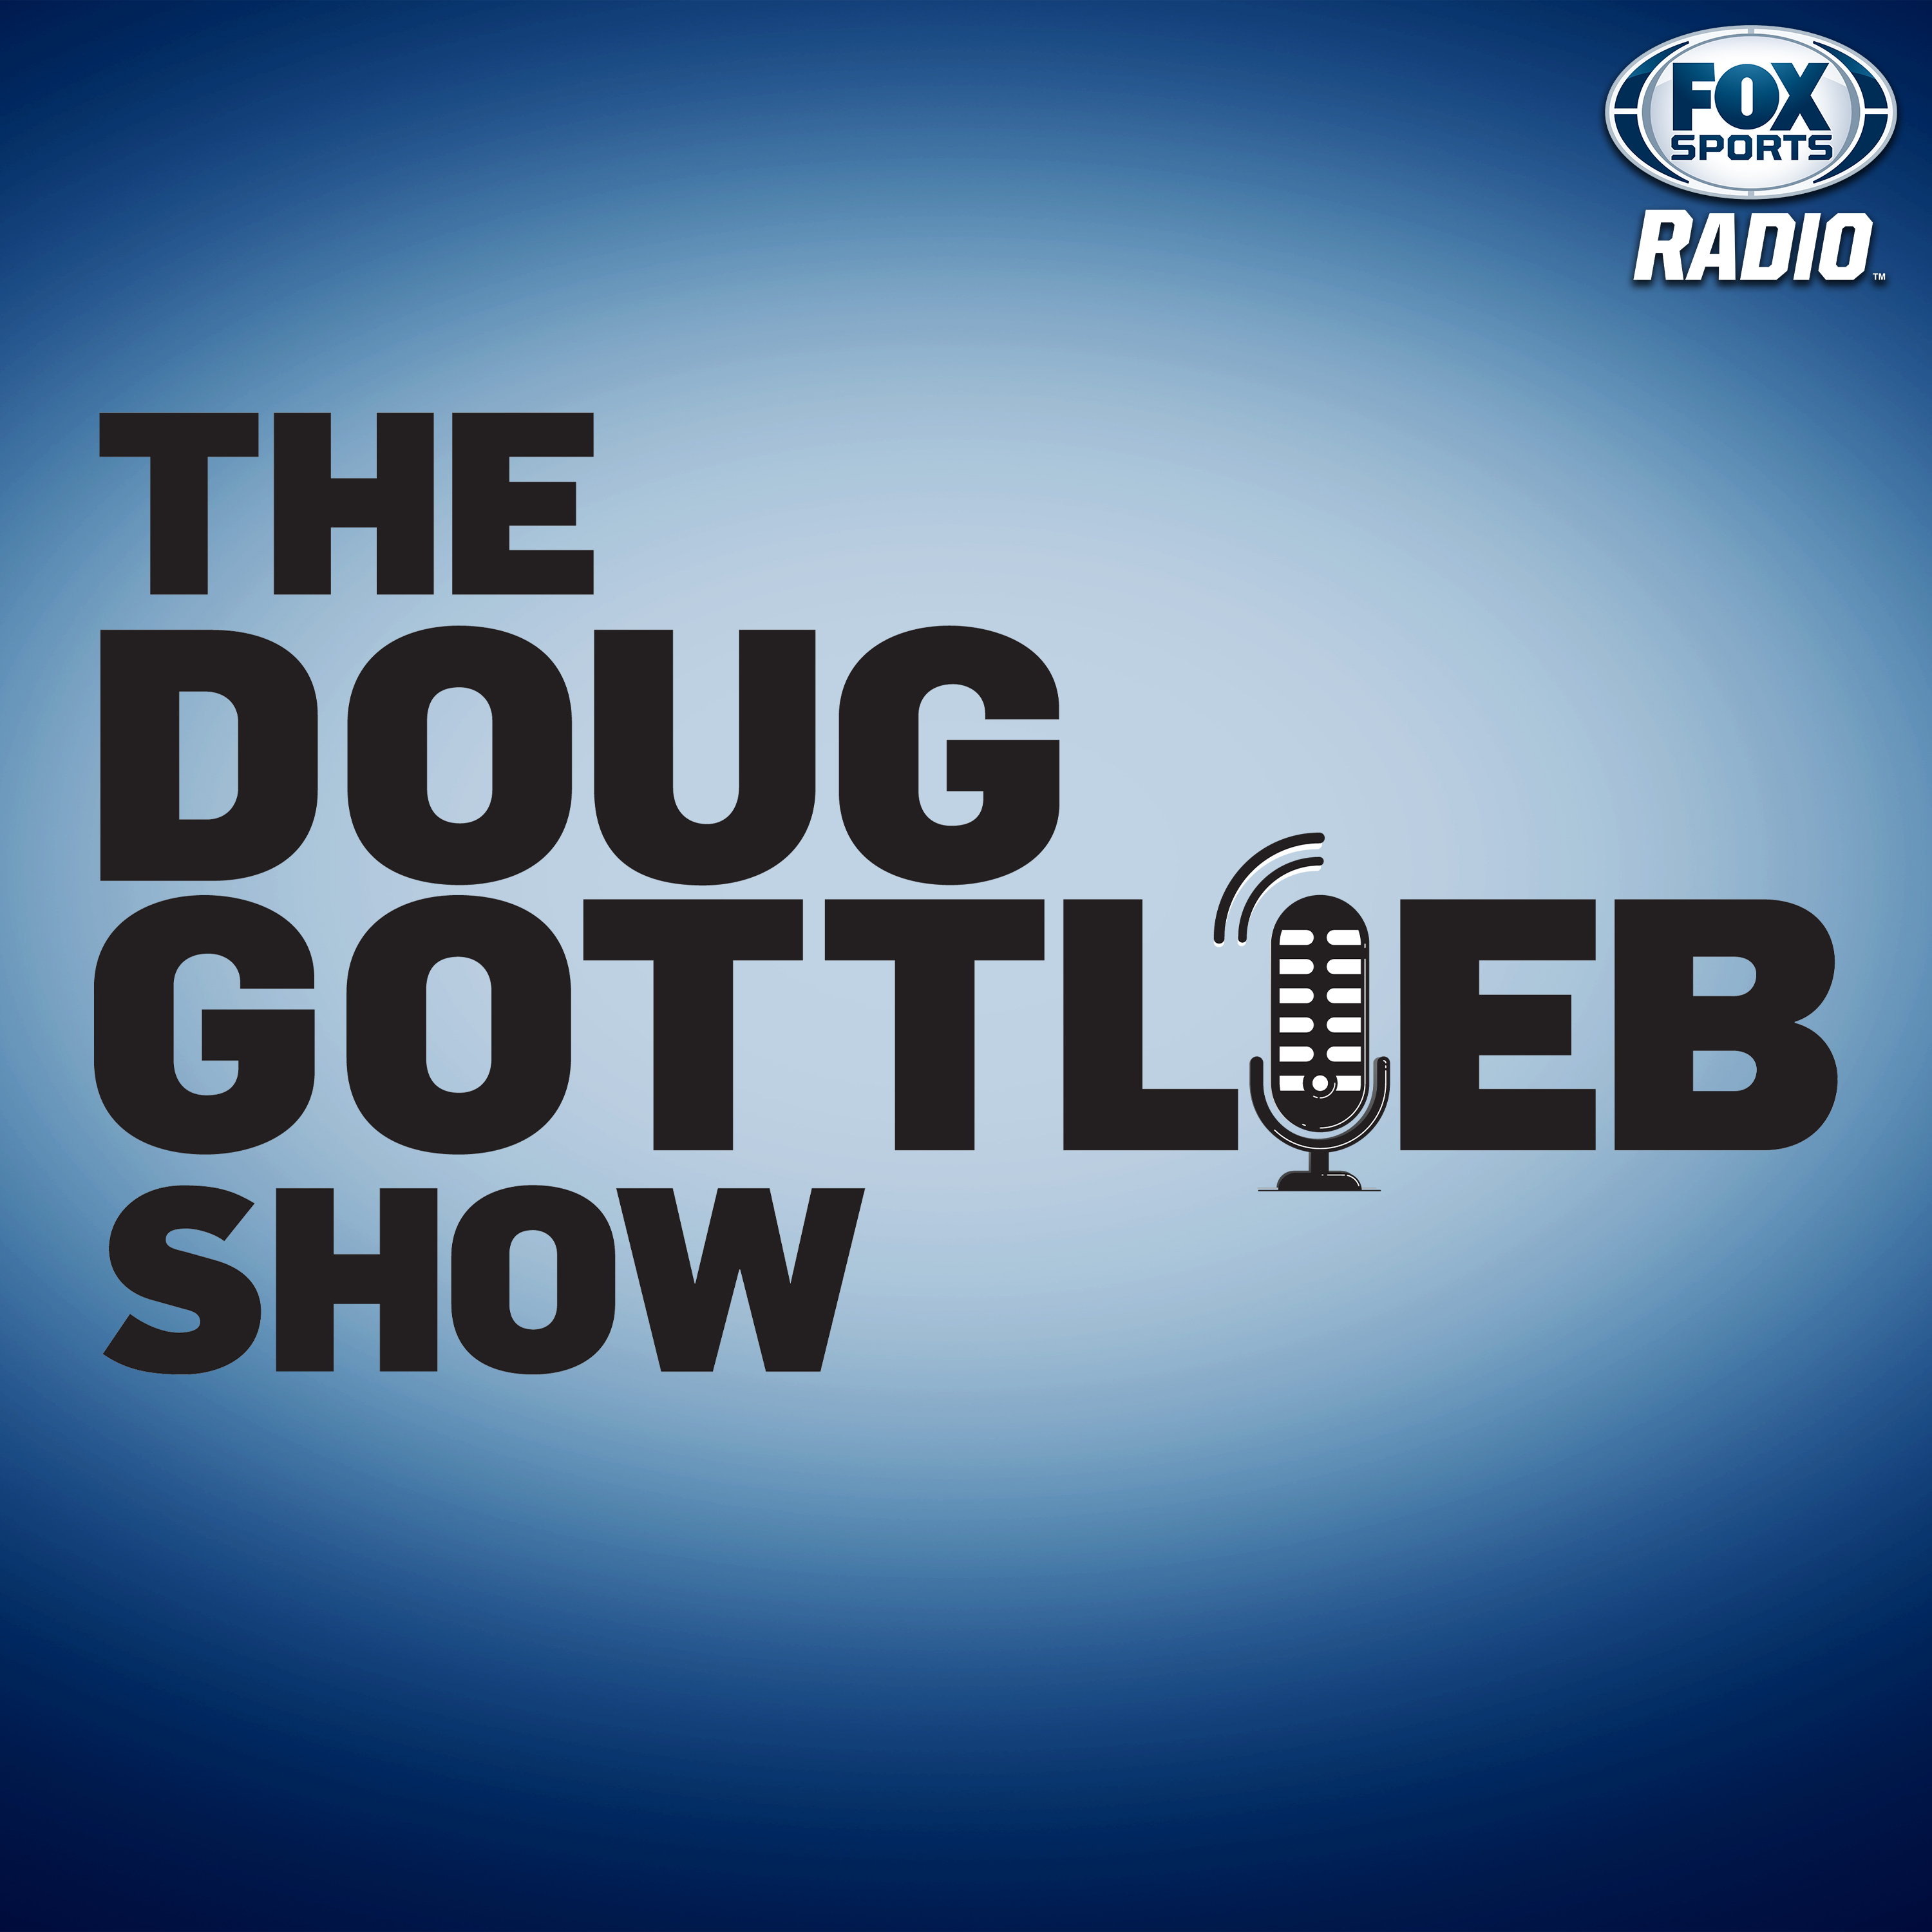 THE BEST OF THE DOUG GOTTLIEB SHOW